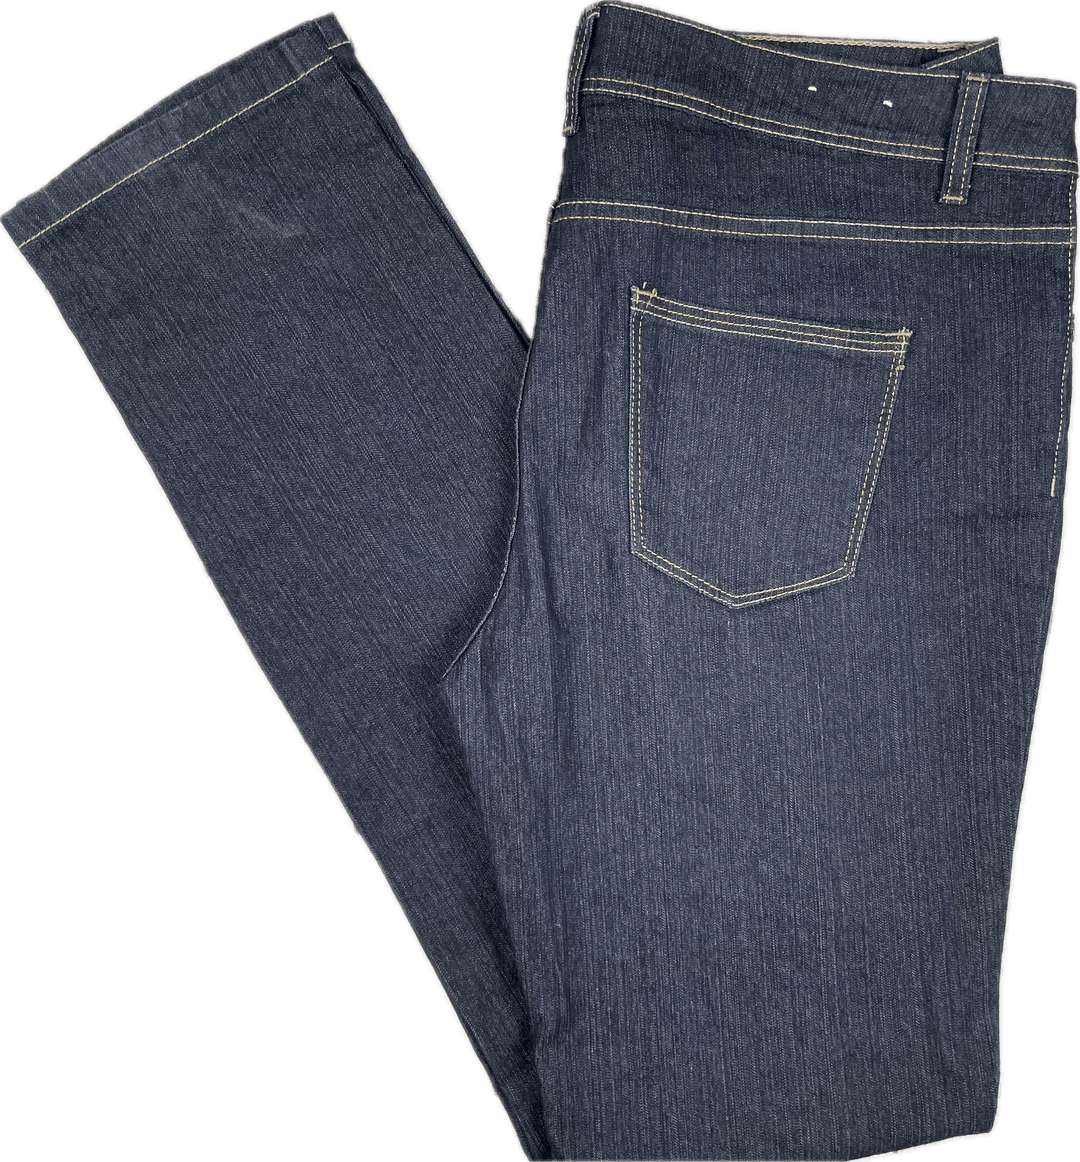 Yes Yes Jeans UK Mid Rise Skinny Jeans - Size 16 - Jean Pool